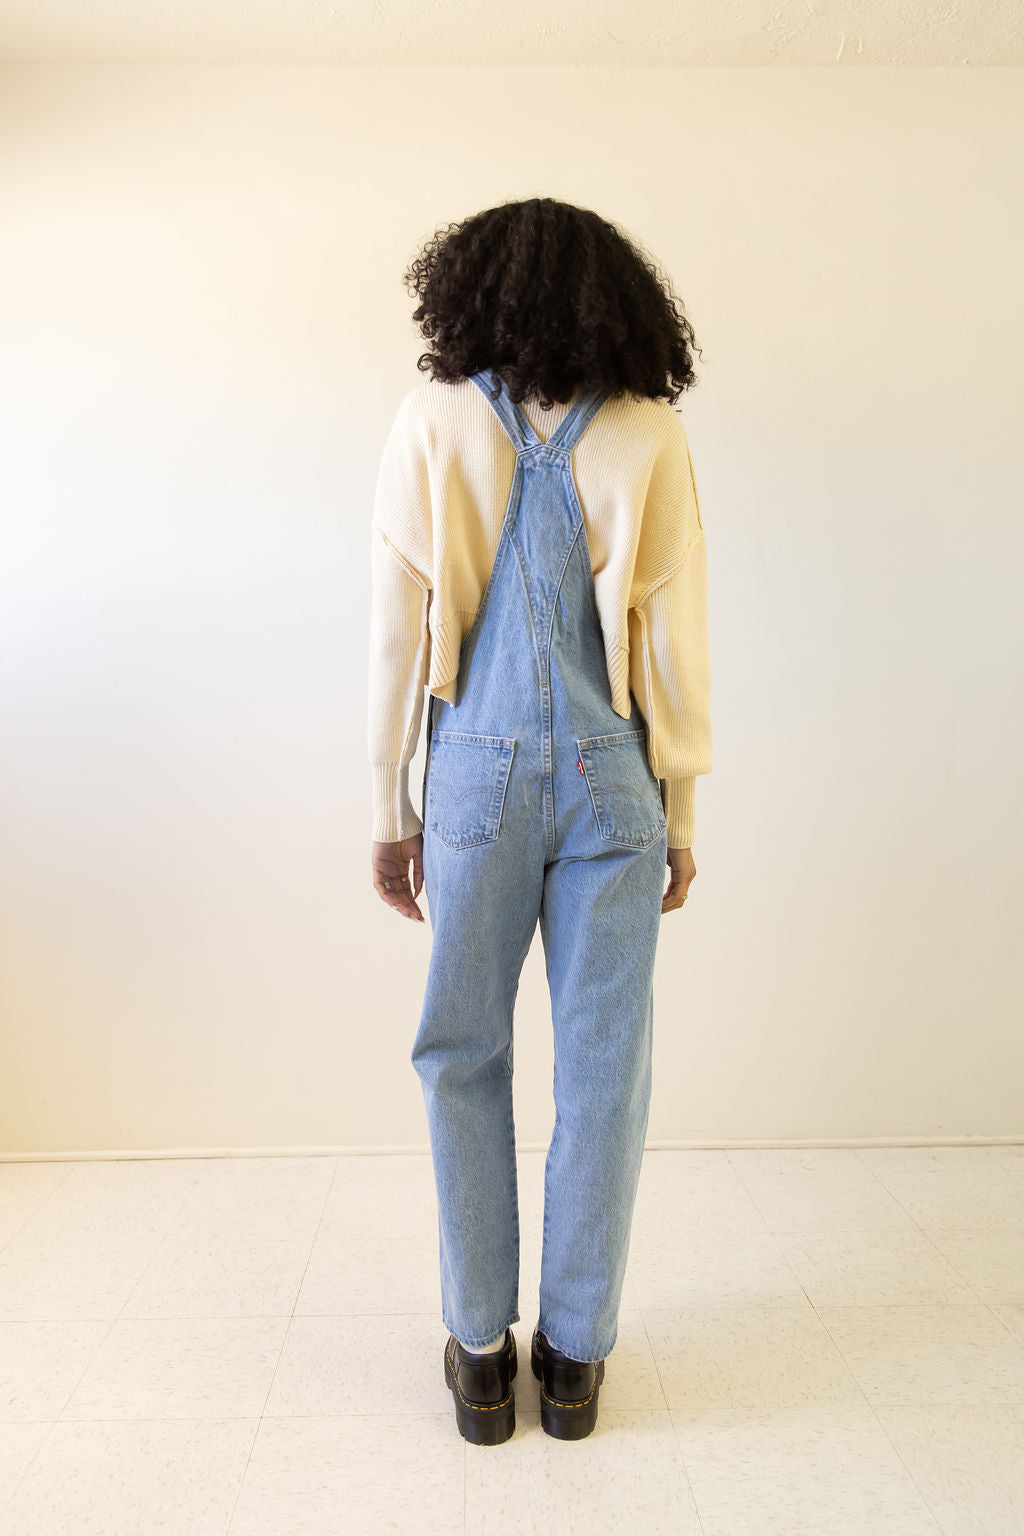 What A Delight Vintage Overalls by Levi's